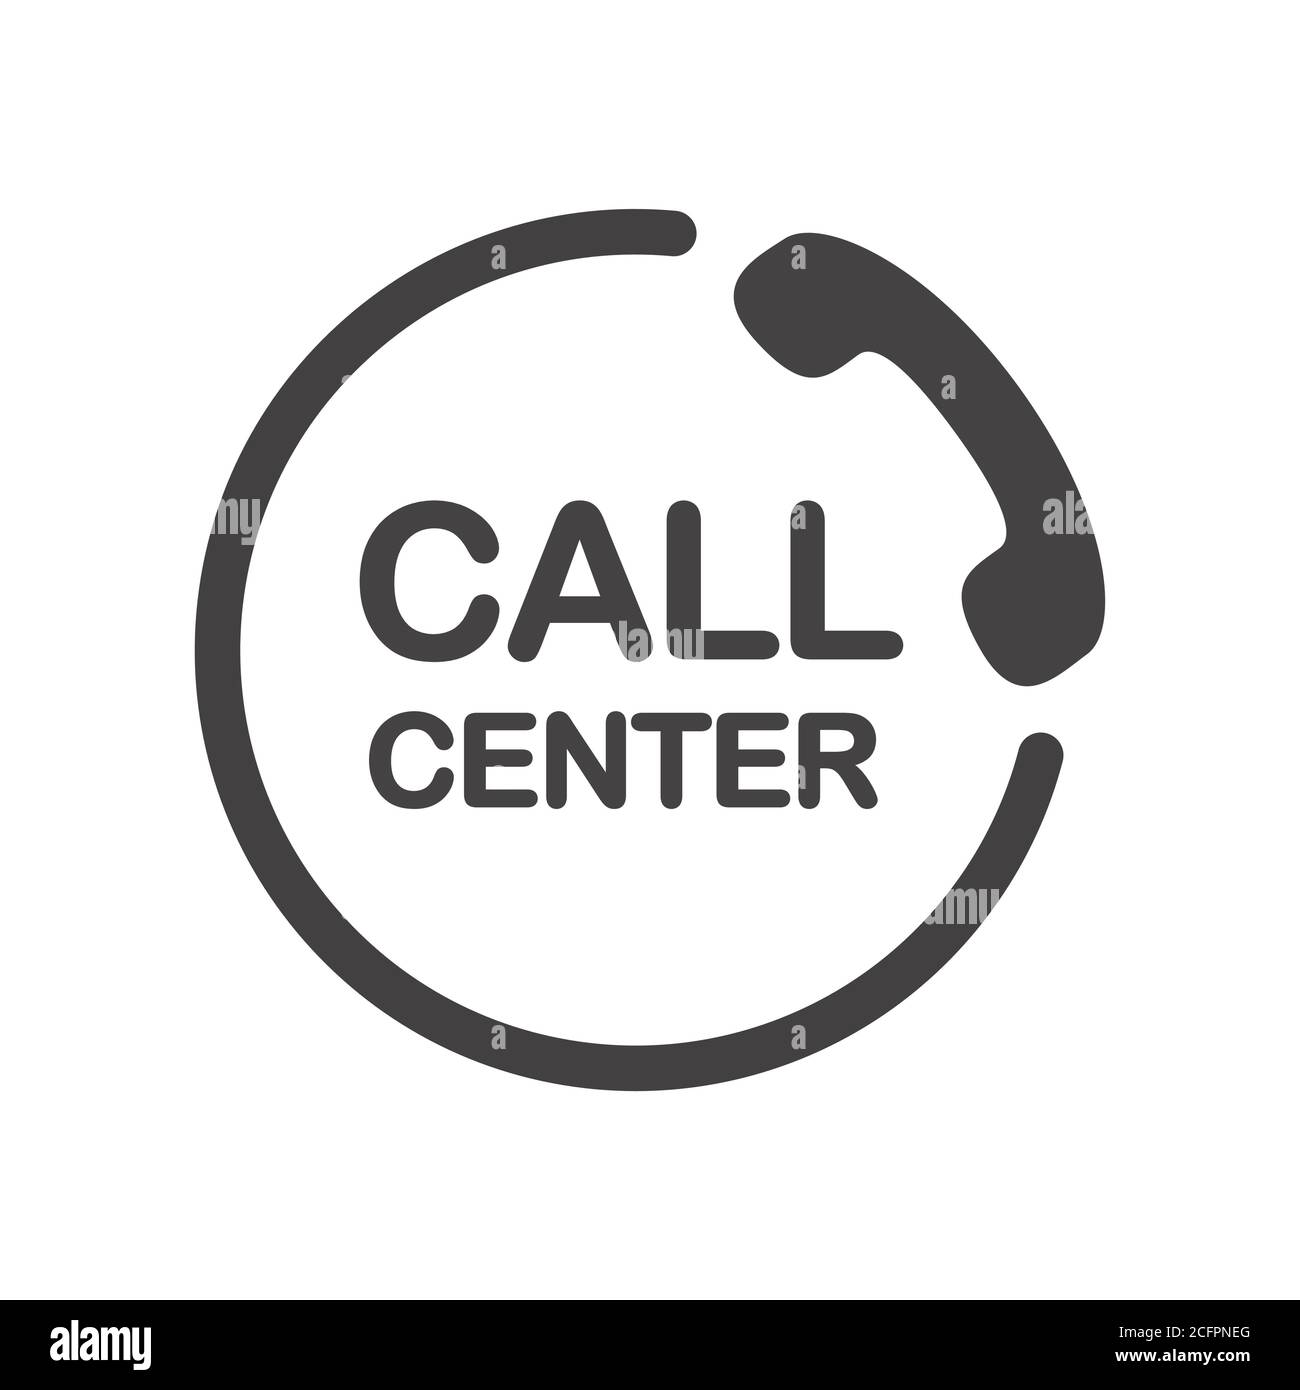 Call center icon. Attendance number symbol. Black sign on white background. Stock Vector